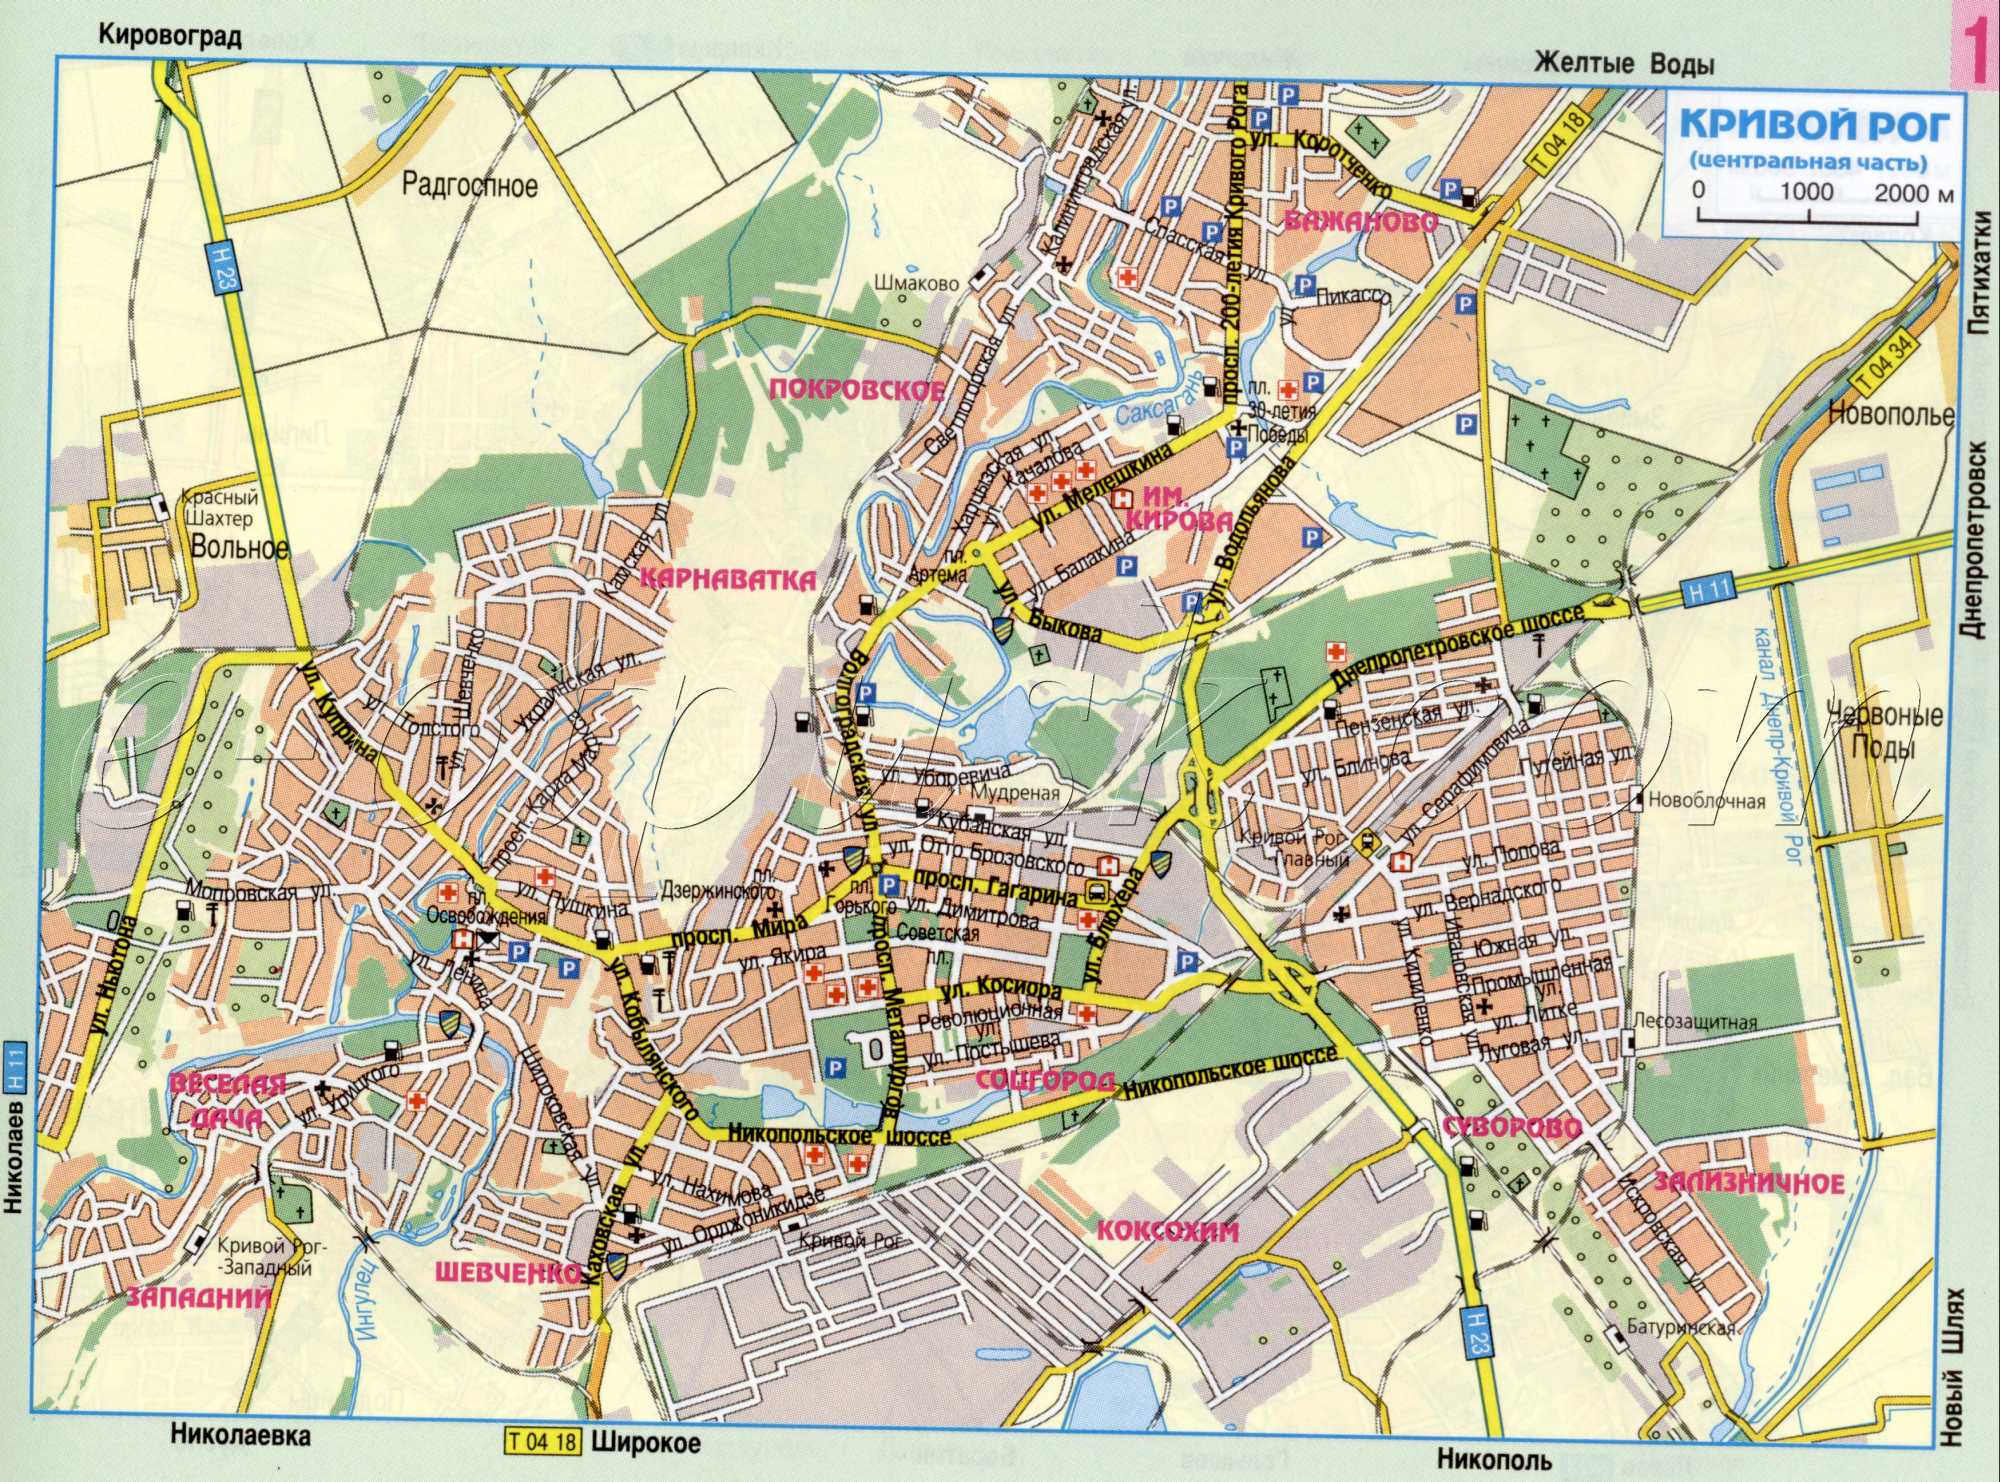 Map of Krivoy Rog, Dnepropetrovsk region. Plan of the city with directions of transit passage through Krivoy Rog. download for free